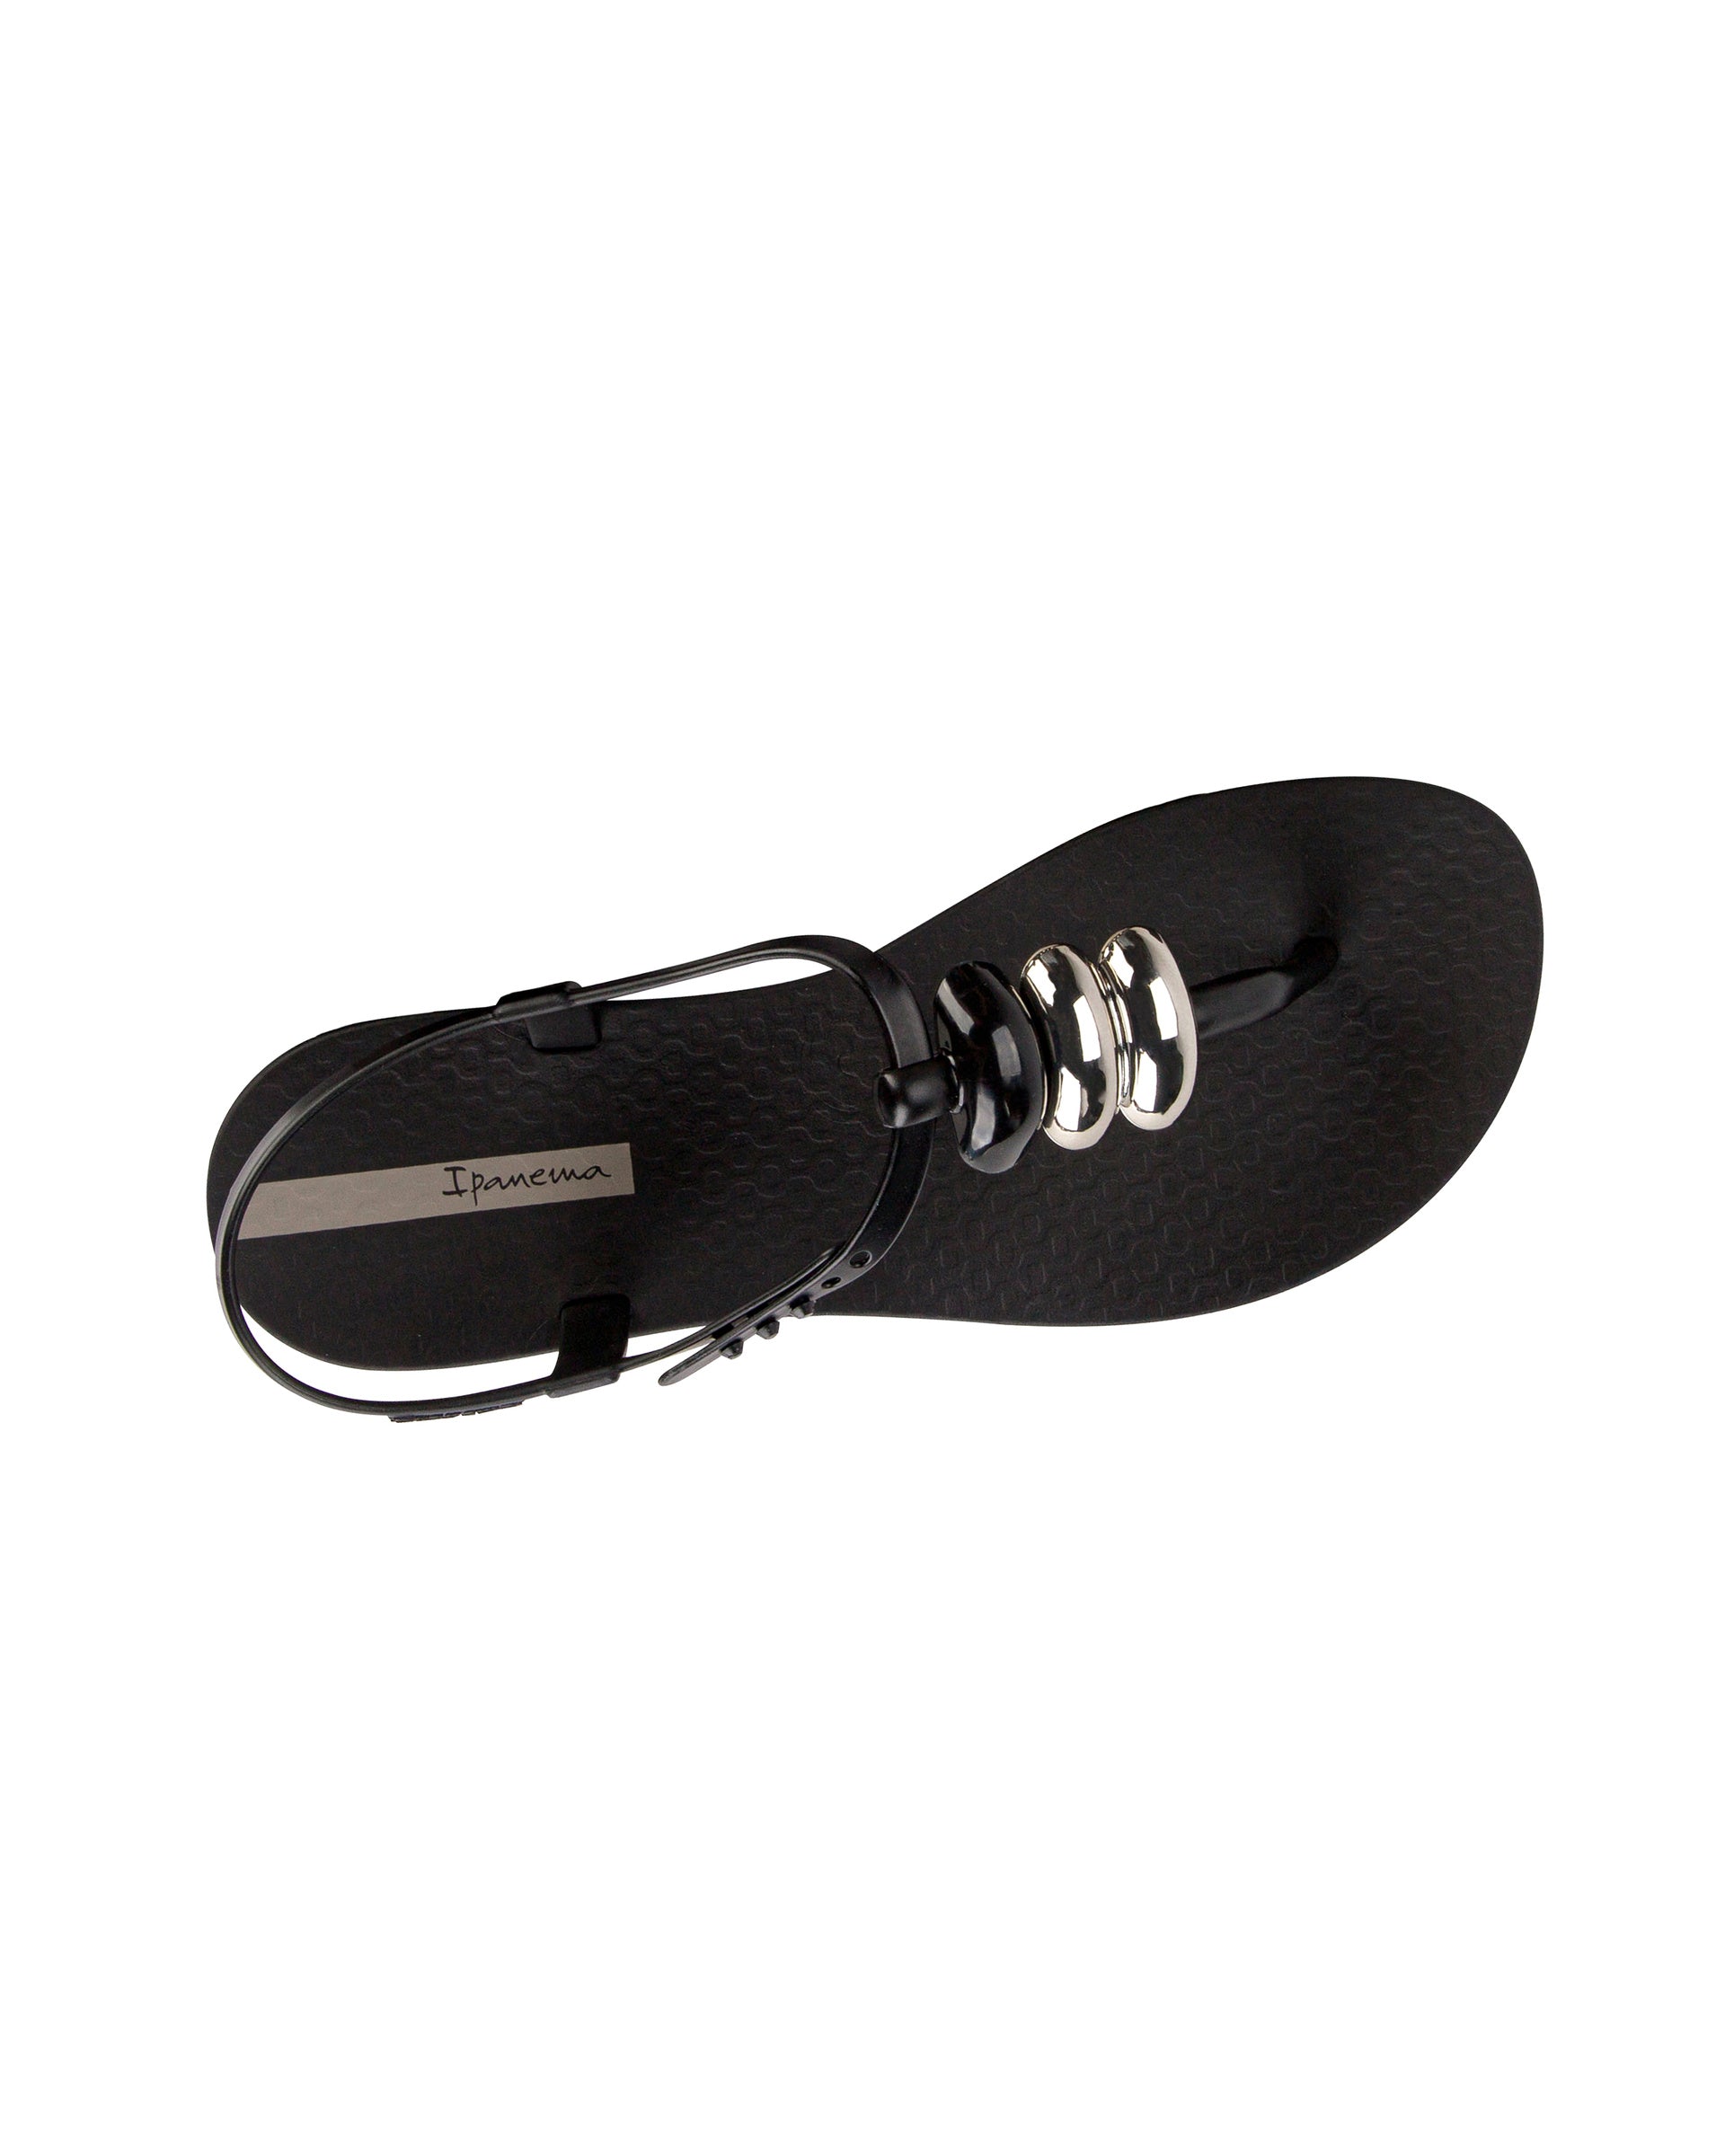 Top view of a black Ipanema Class women's sandal with 3 bubble baubles on the t-strap.